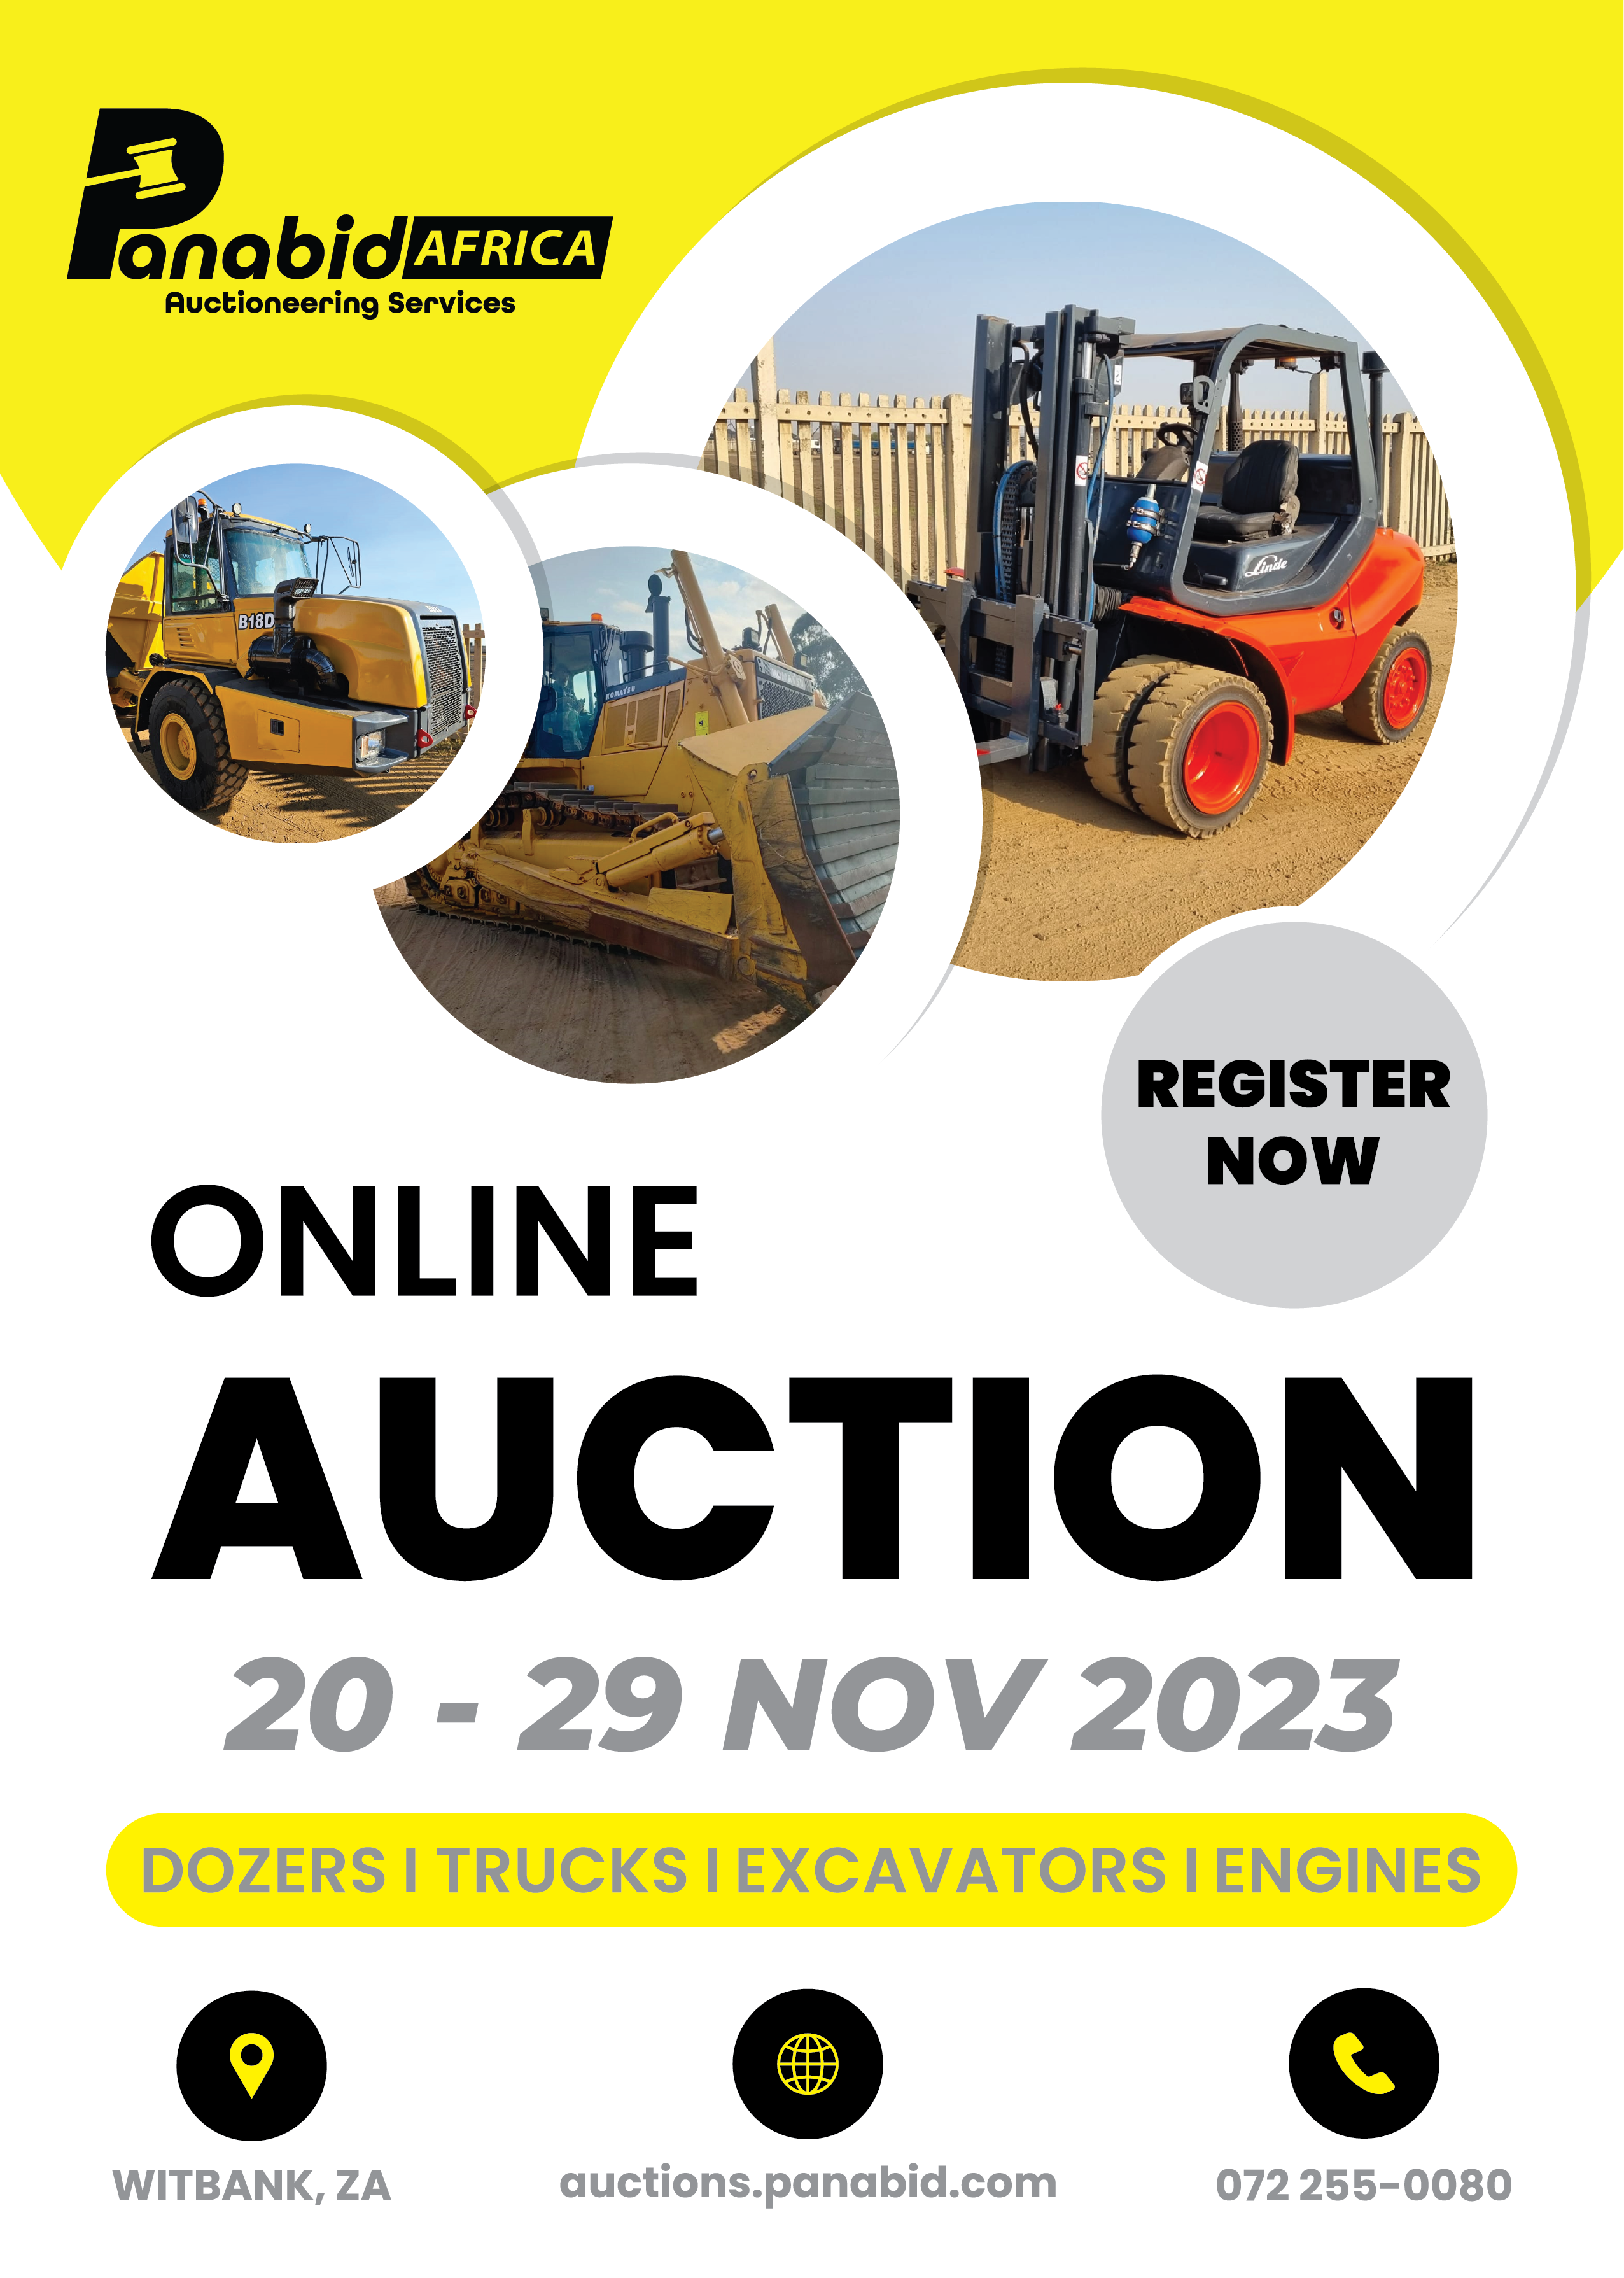 MASSIVE ONLINE EQUIPMENT AUCTION OF CAT, KOMATSU, VOLVO, BELL AND HITACHI ARTICULATED DUMP TRUCKS, DOZERS, EXCAVATORS, LOADERS, COMPLETE ENGINES AND LOTS OF VARIOUS OTHER MACHINES, TRUCKS, TRAILERS, FORKLIFTS, PART STRIPPERS, LOOSE ASSETS AND SCRAP